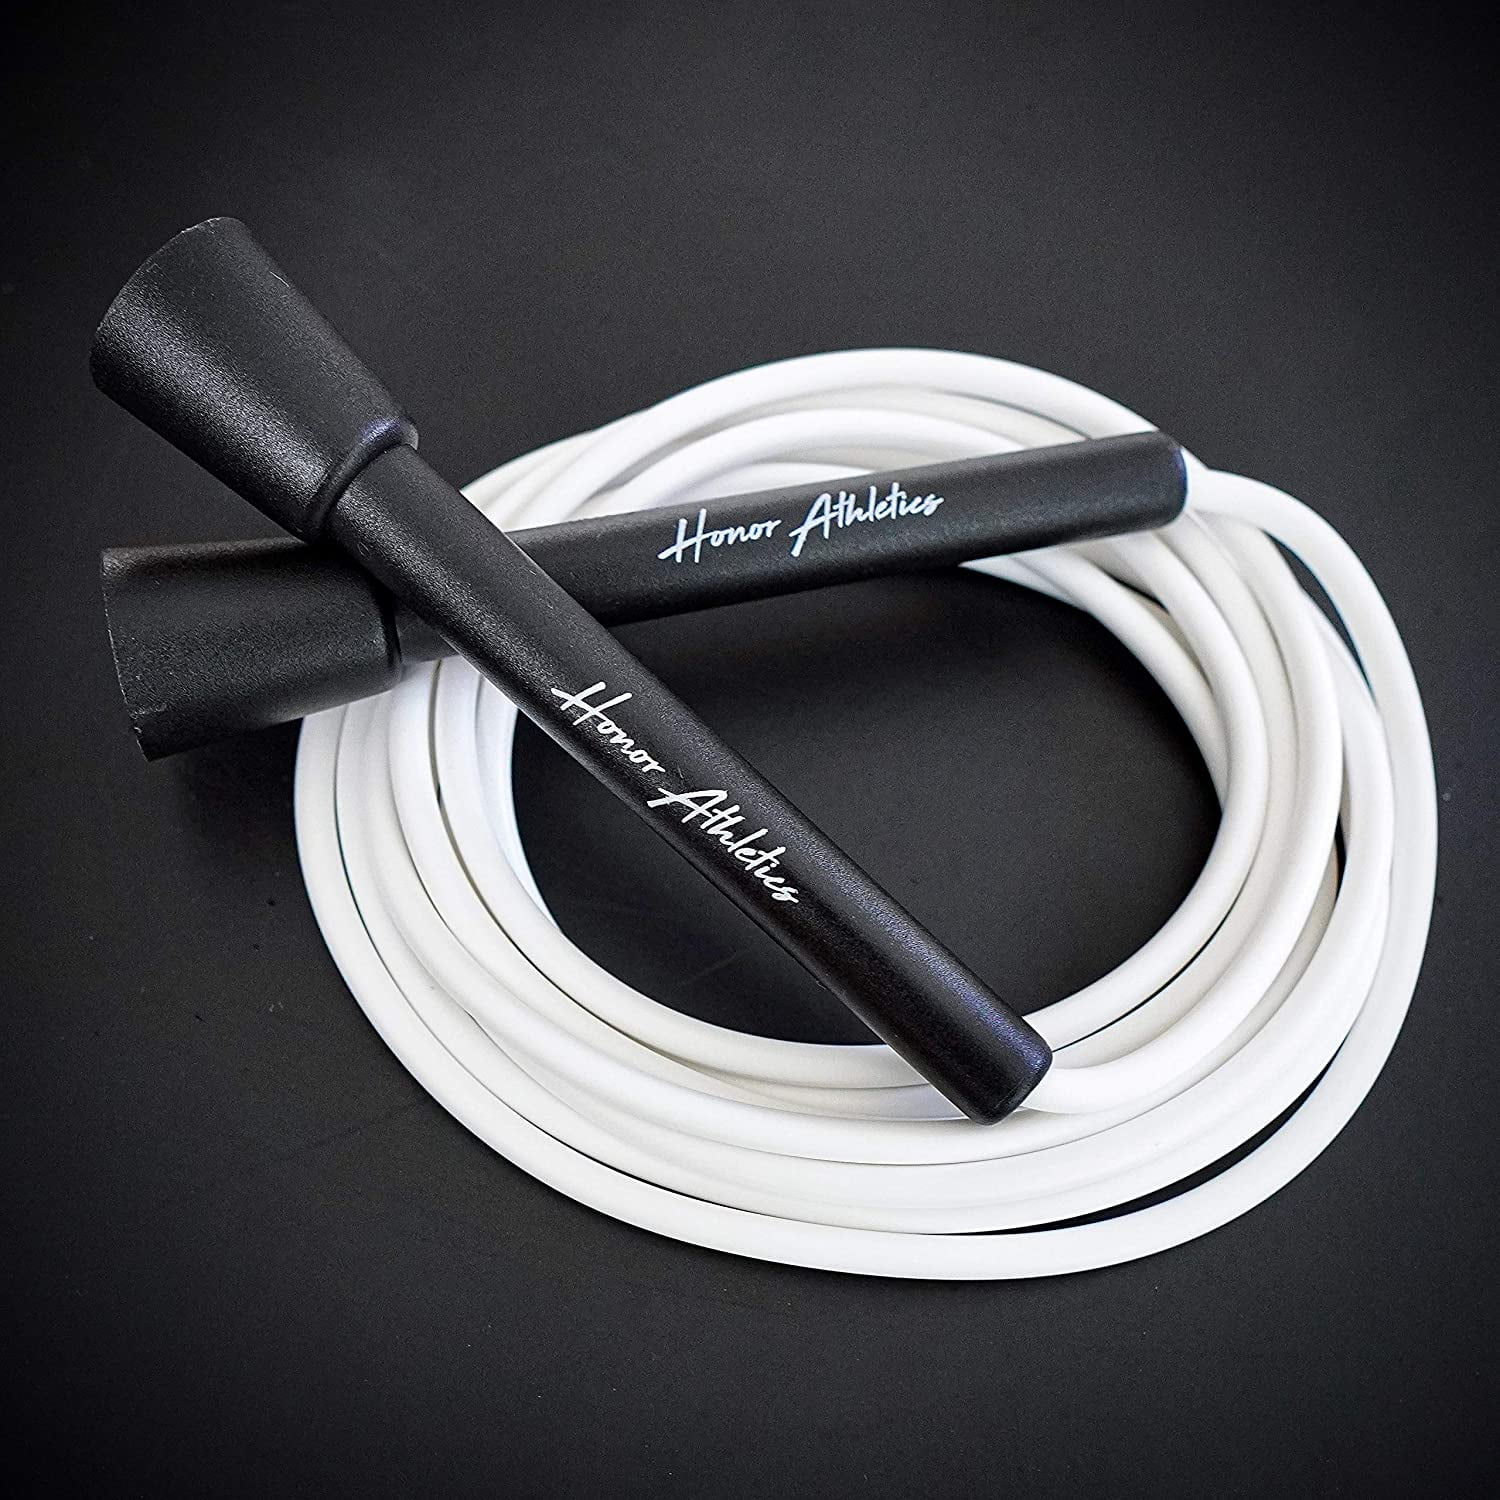 MMA HONOR ATHLETICS Ultimate Speed Rope Jump Rope Best for Double Under Adjustable 10ft Boxing Cardio Fitness Training Condition 